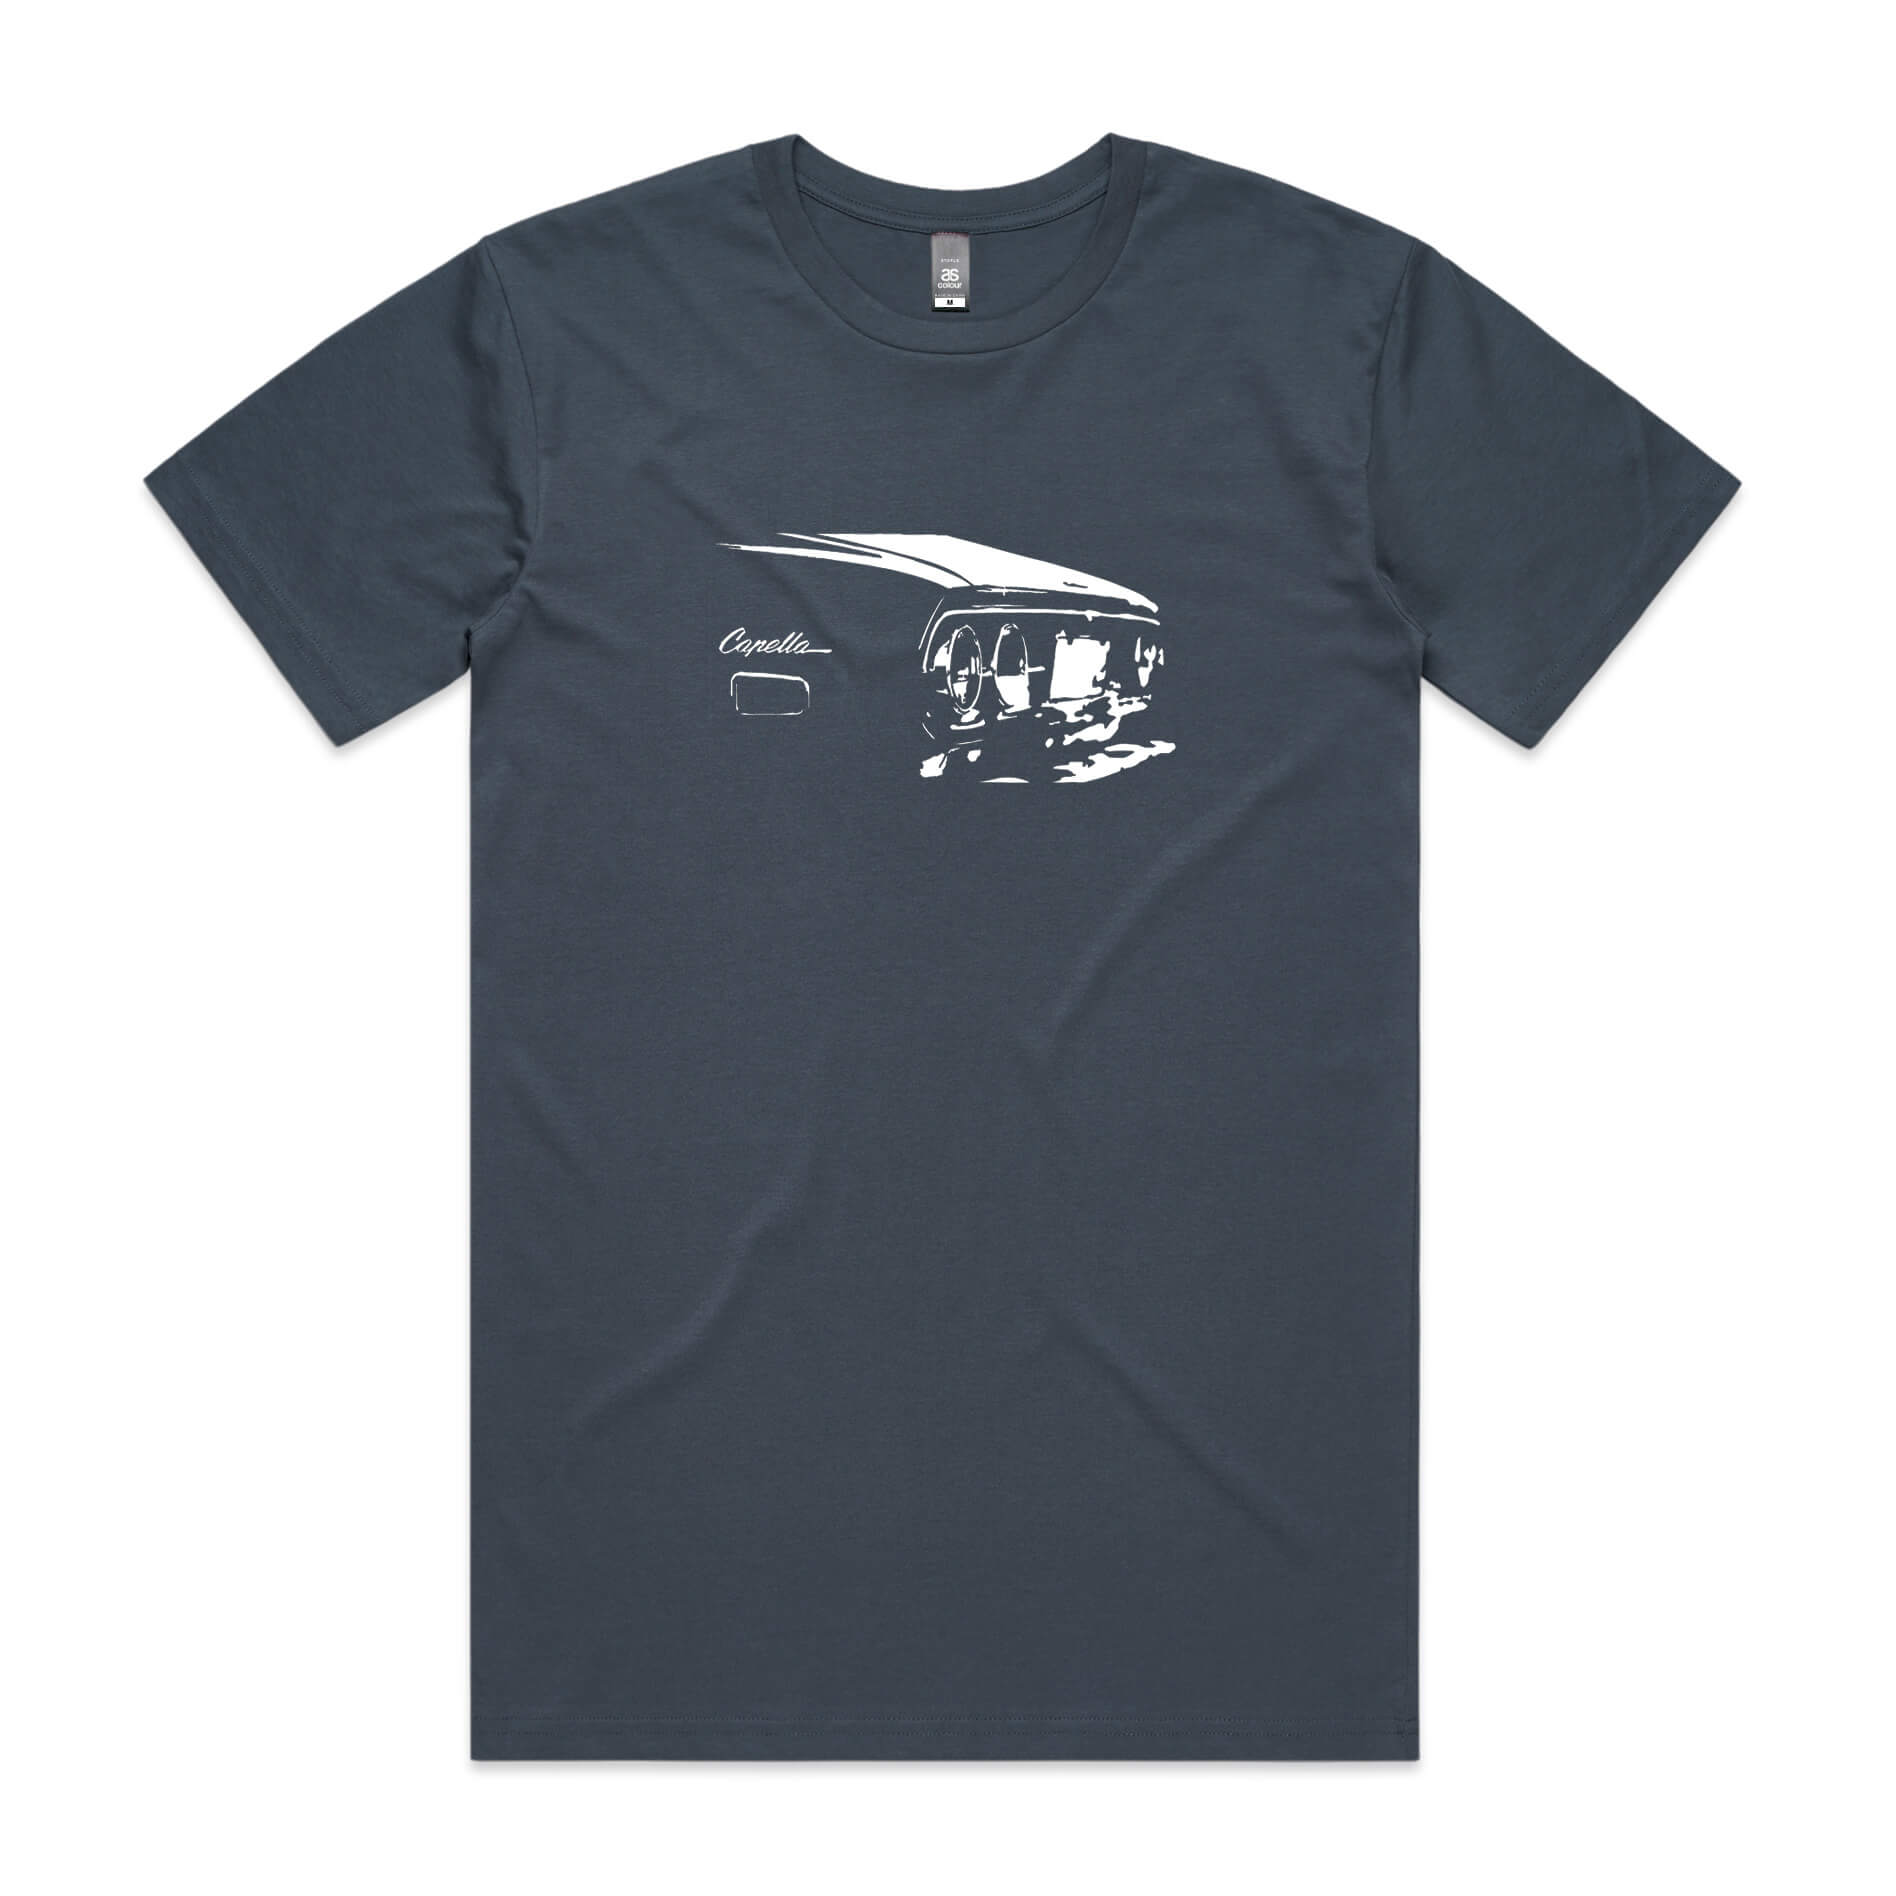 Mazda Capella t-shirt in petrol blue with white RX2 car graphic